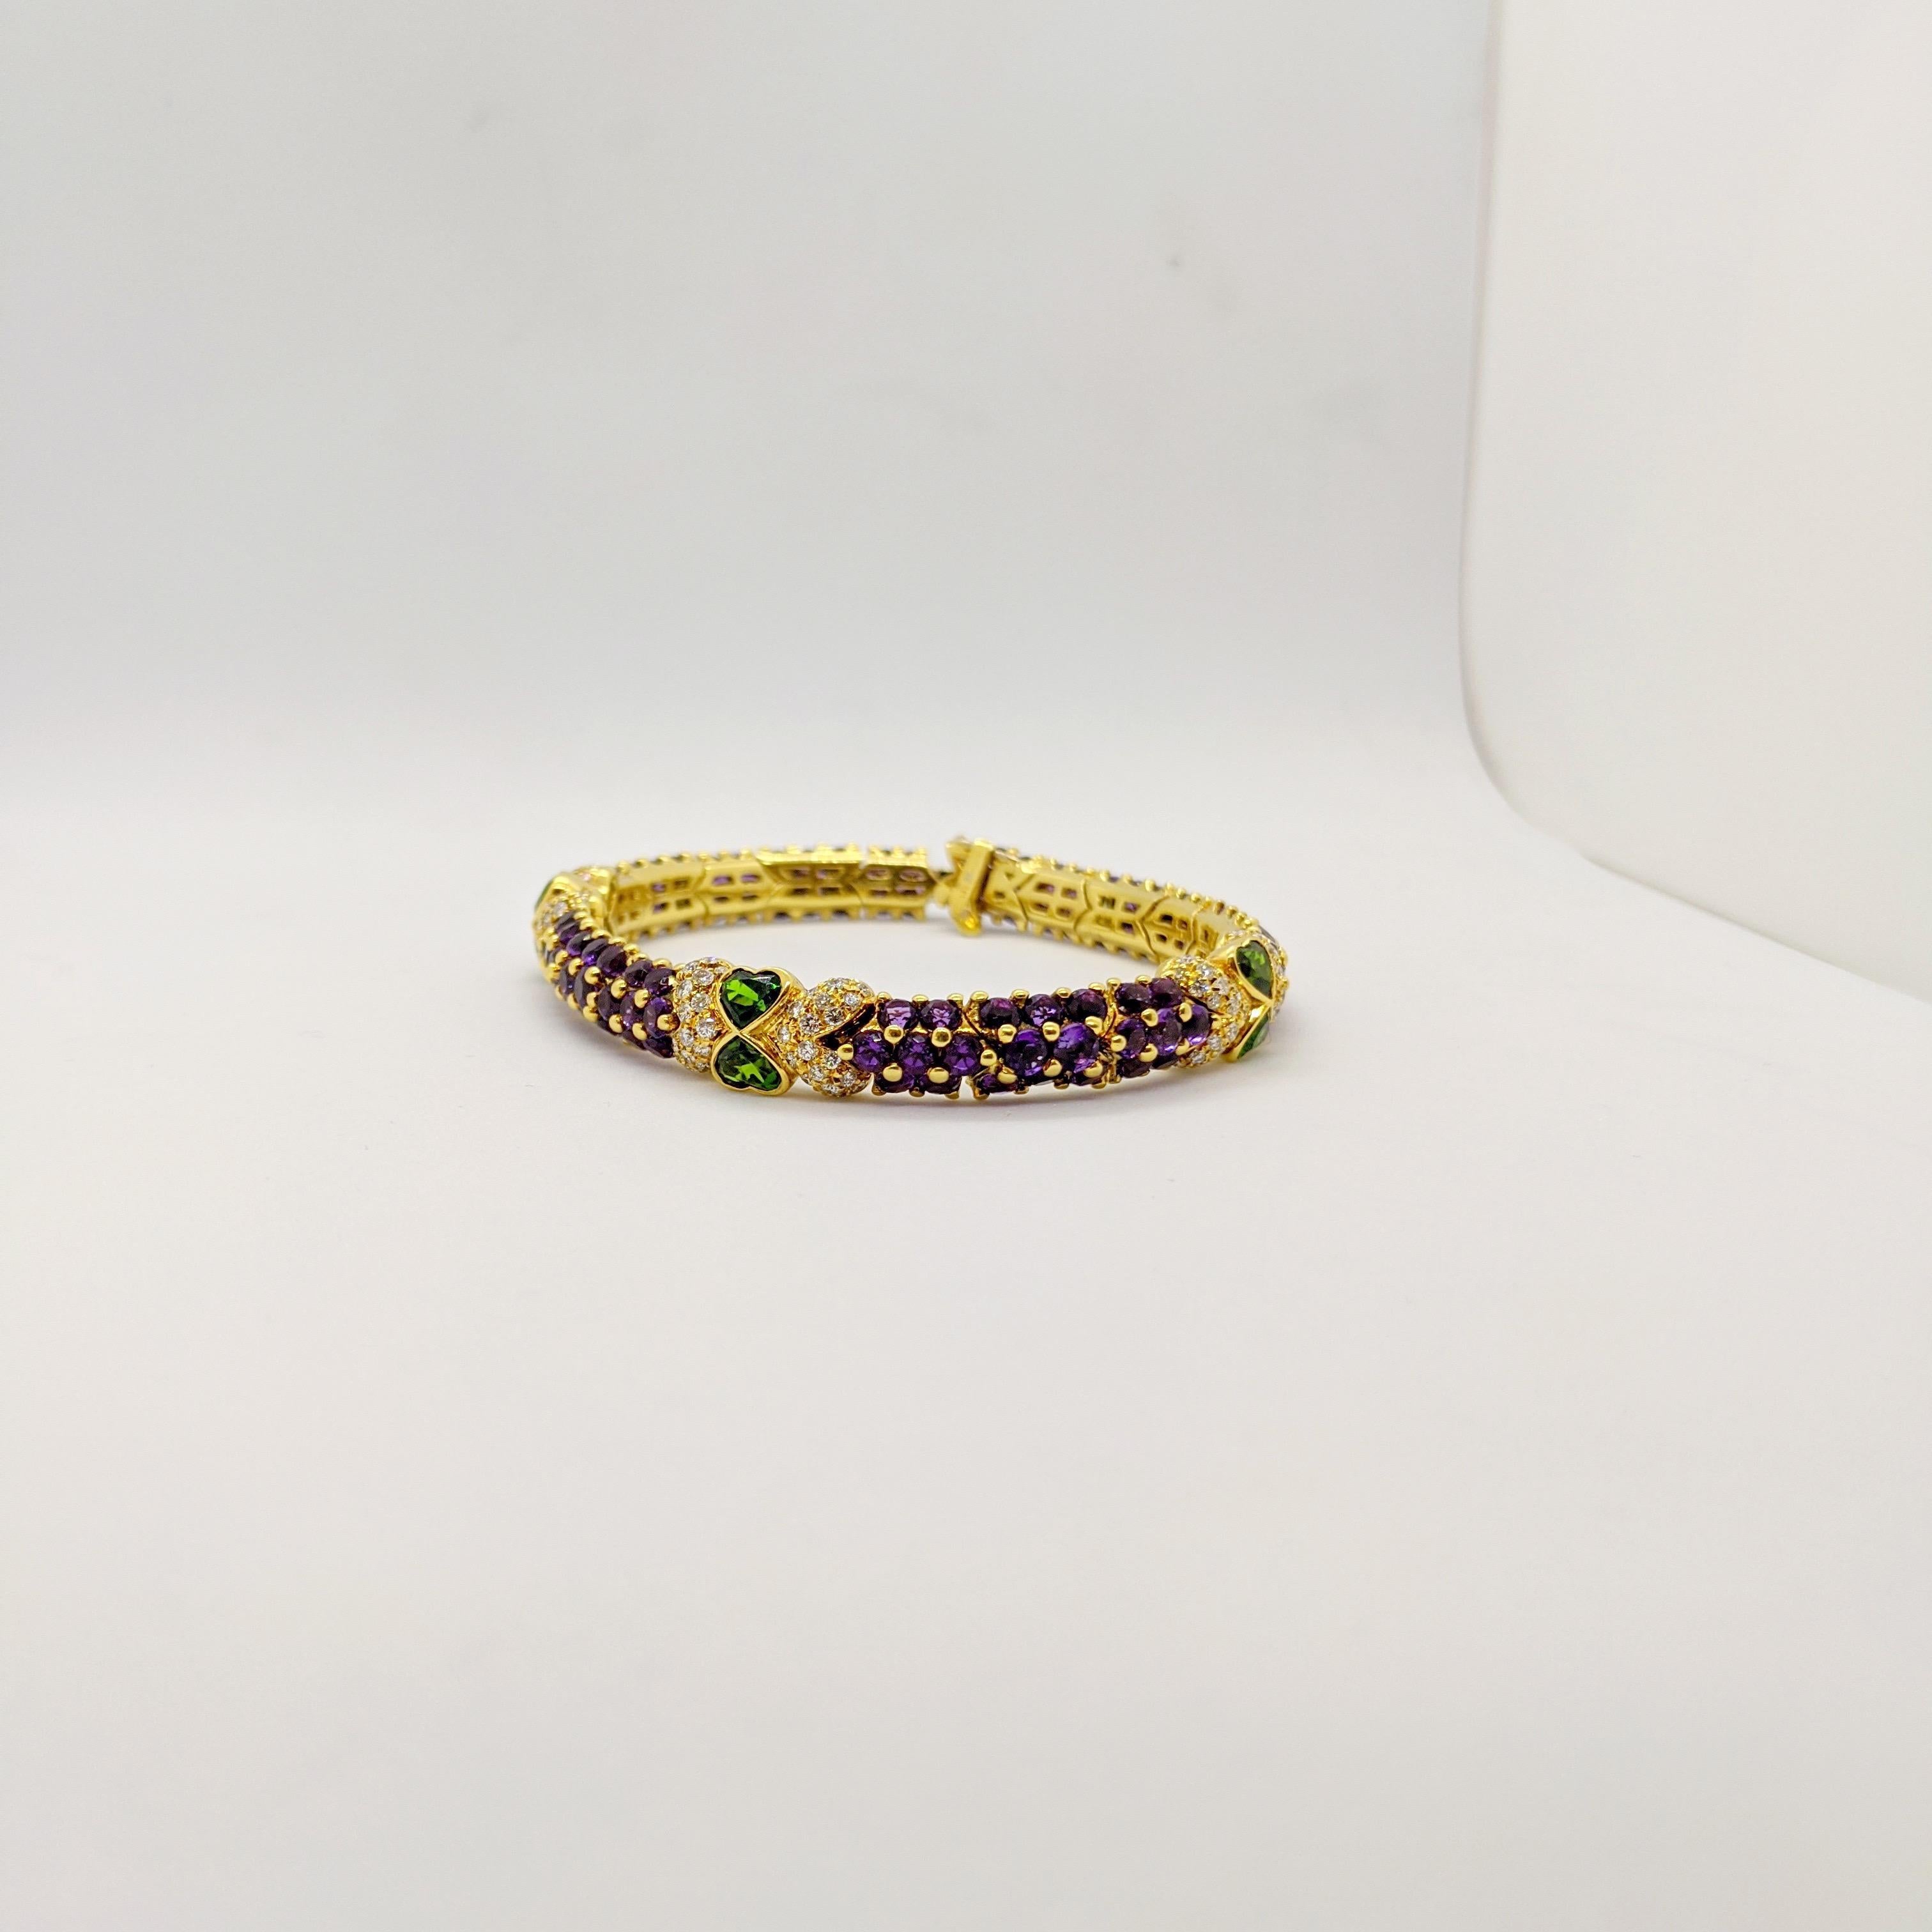 G. Verdi 18KT. Gold Bracelet with 15.69Cts of Amethyst & Tsavorites, & Diamonds In New Condition For Sale In New York, NY